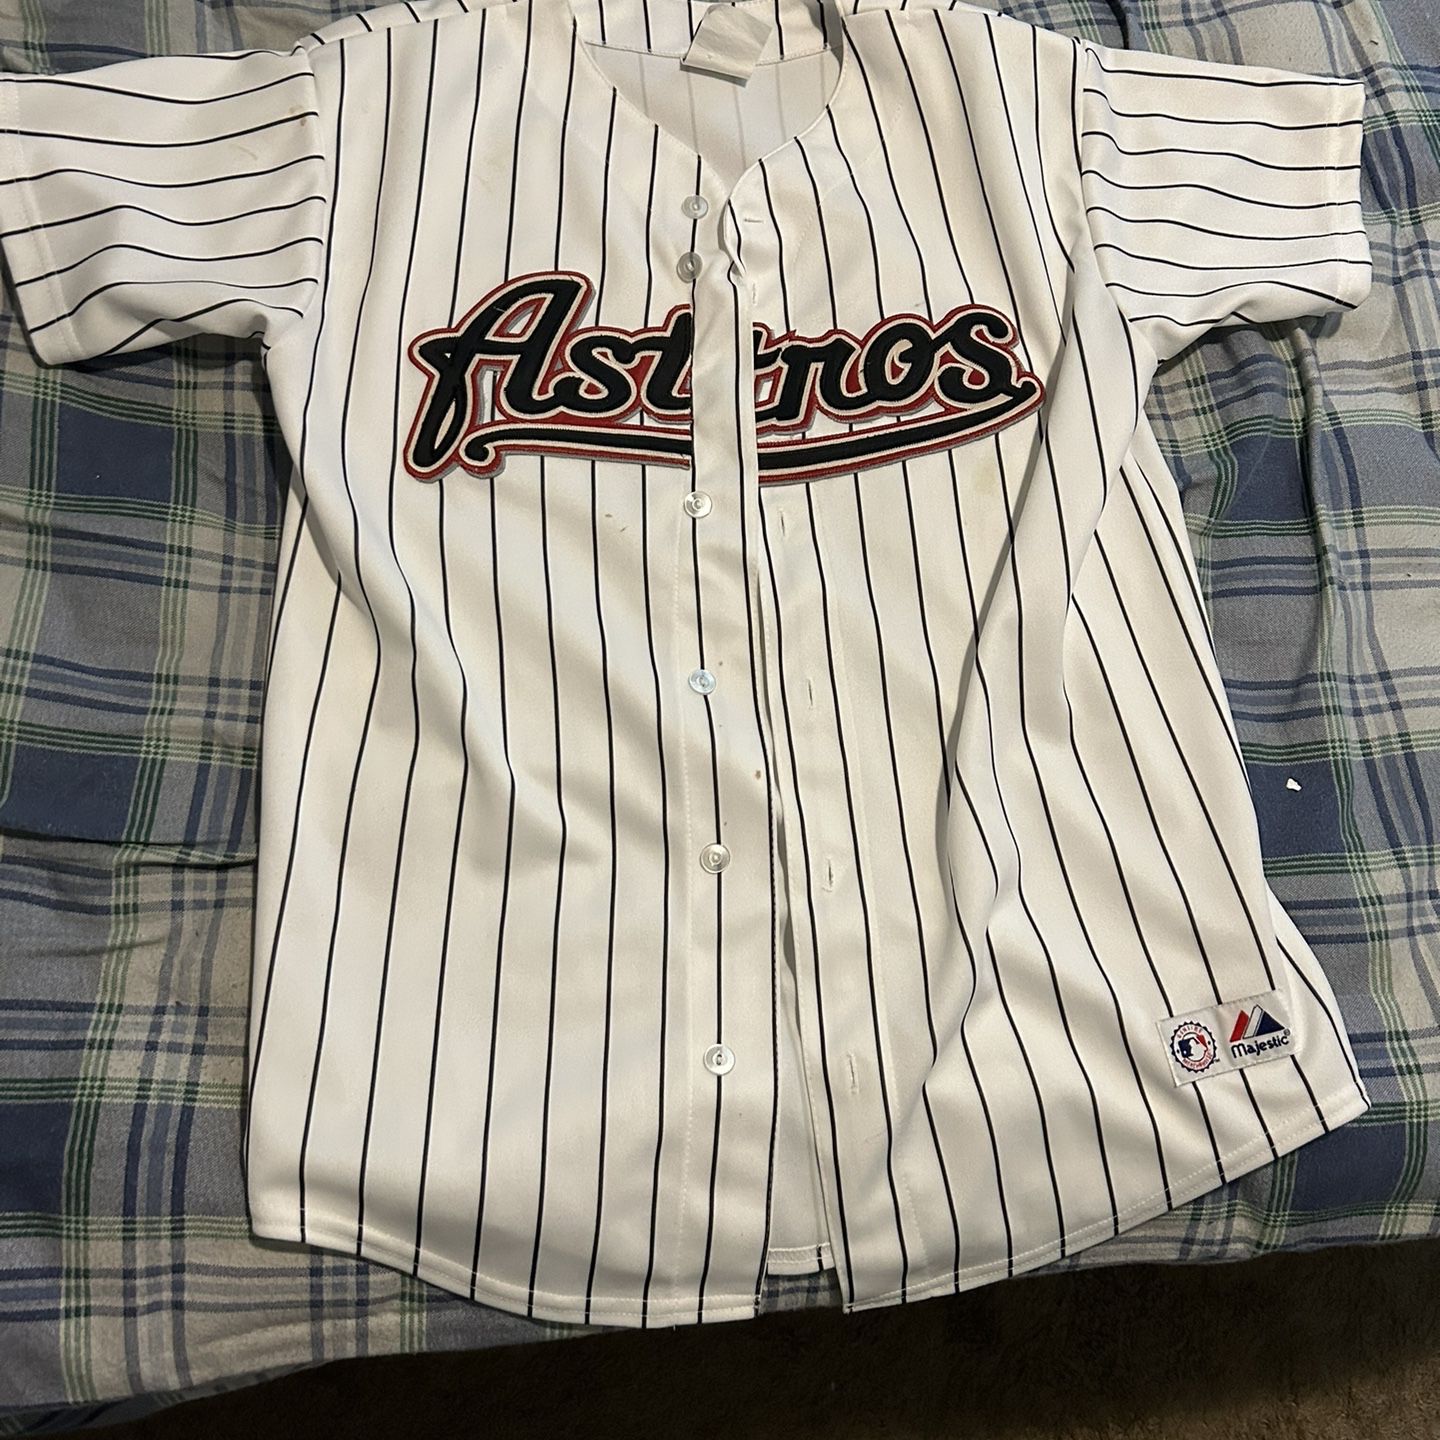 Astros Peña Space City Jersey for Sale in Houston, TX - OfferUp